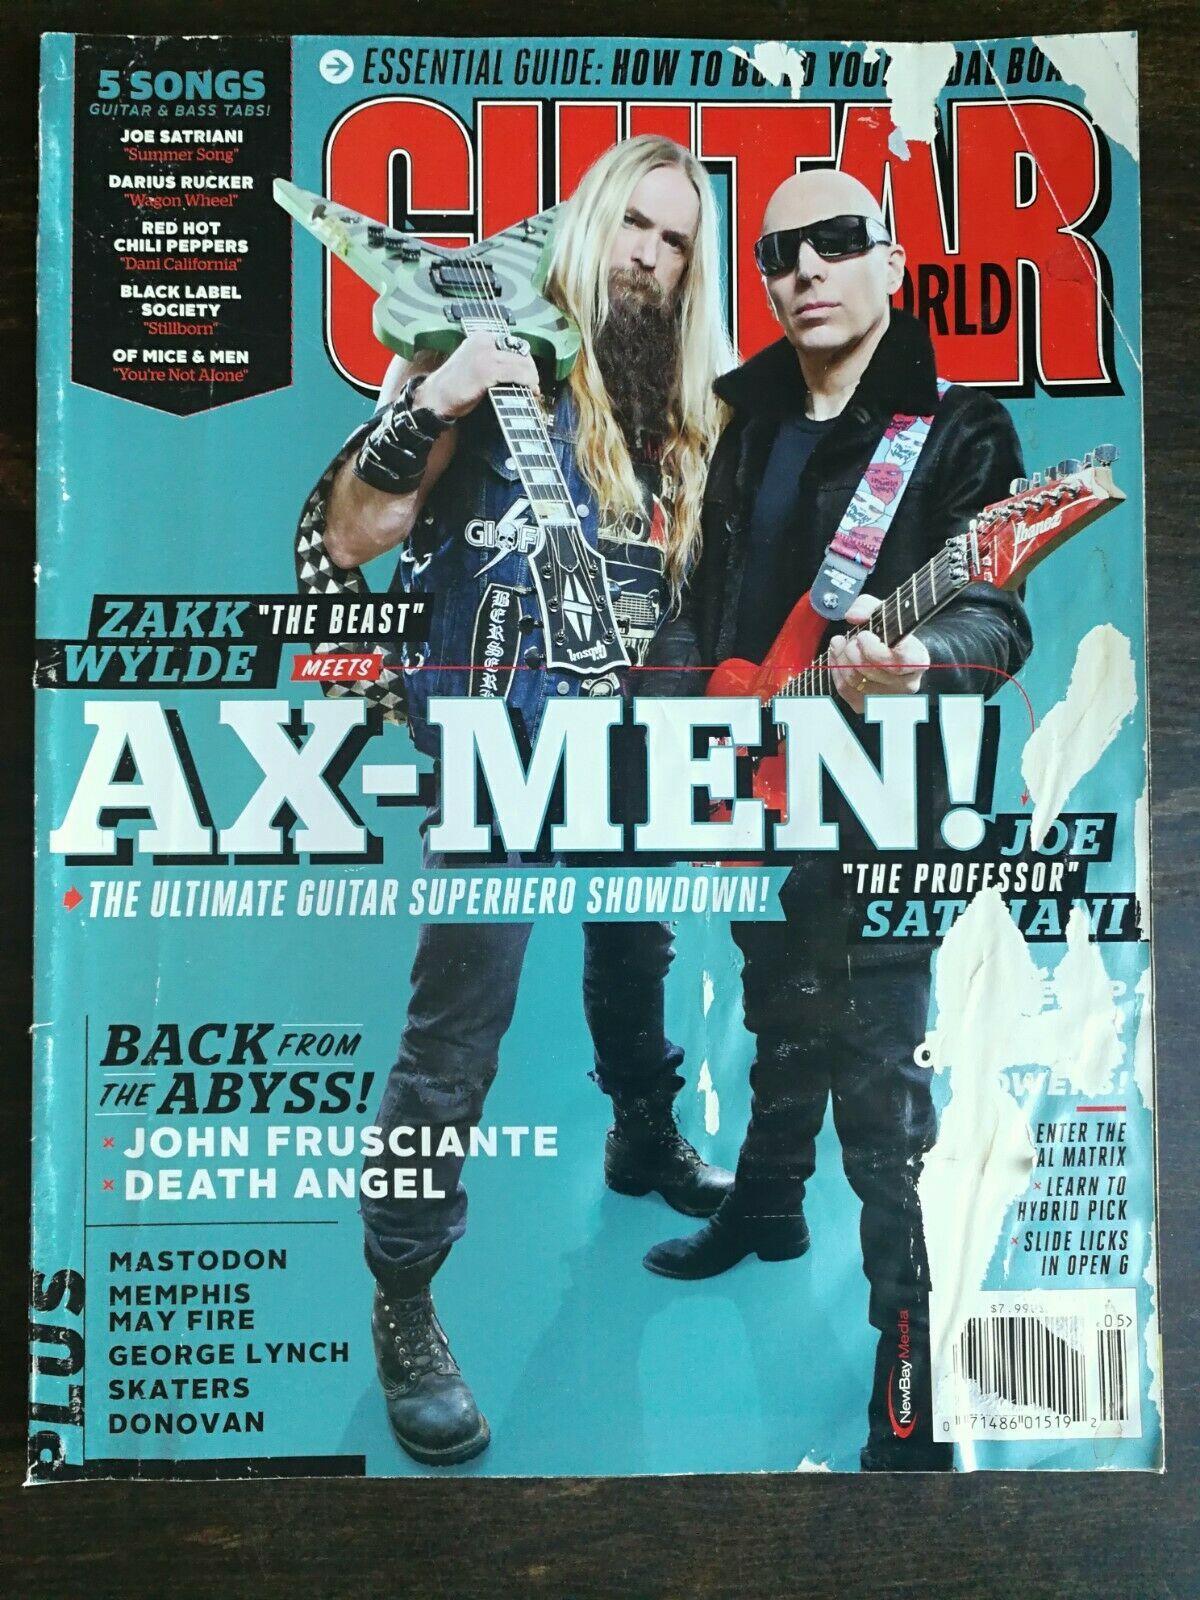 Primary image for Guitar World Magazine May 2014 - AX-MEN - Death Angel - John Frusciante 